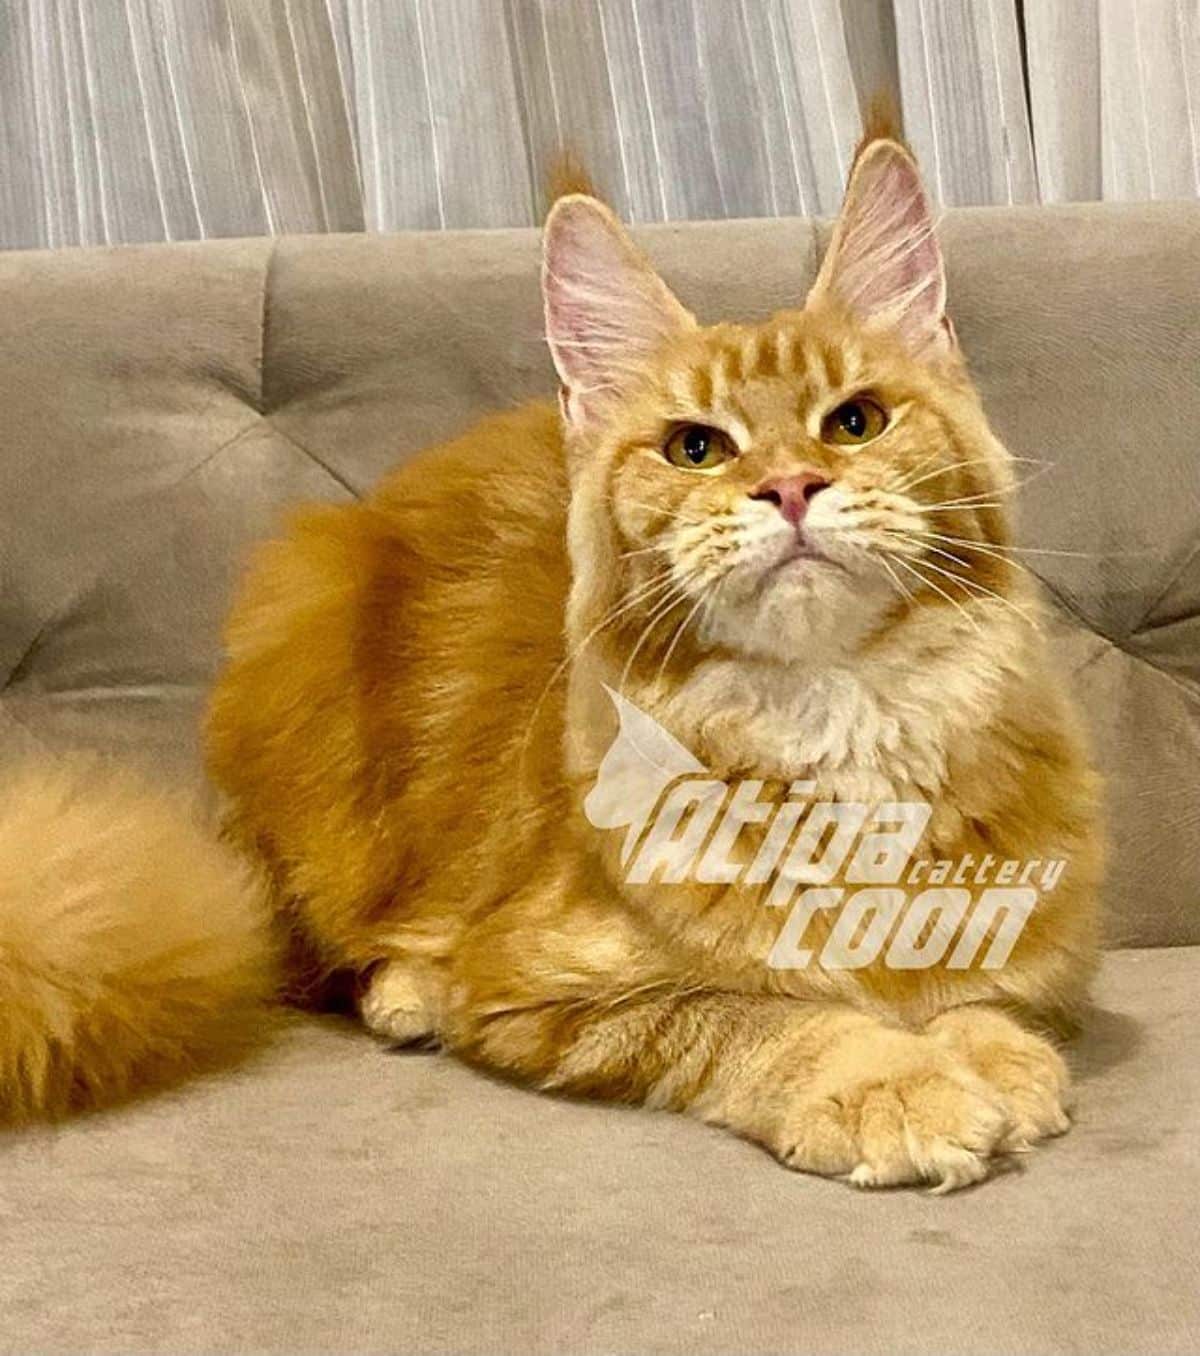 A ginger maine coon lying on a couch.